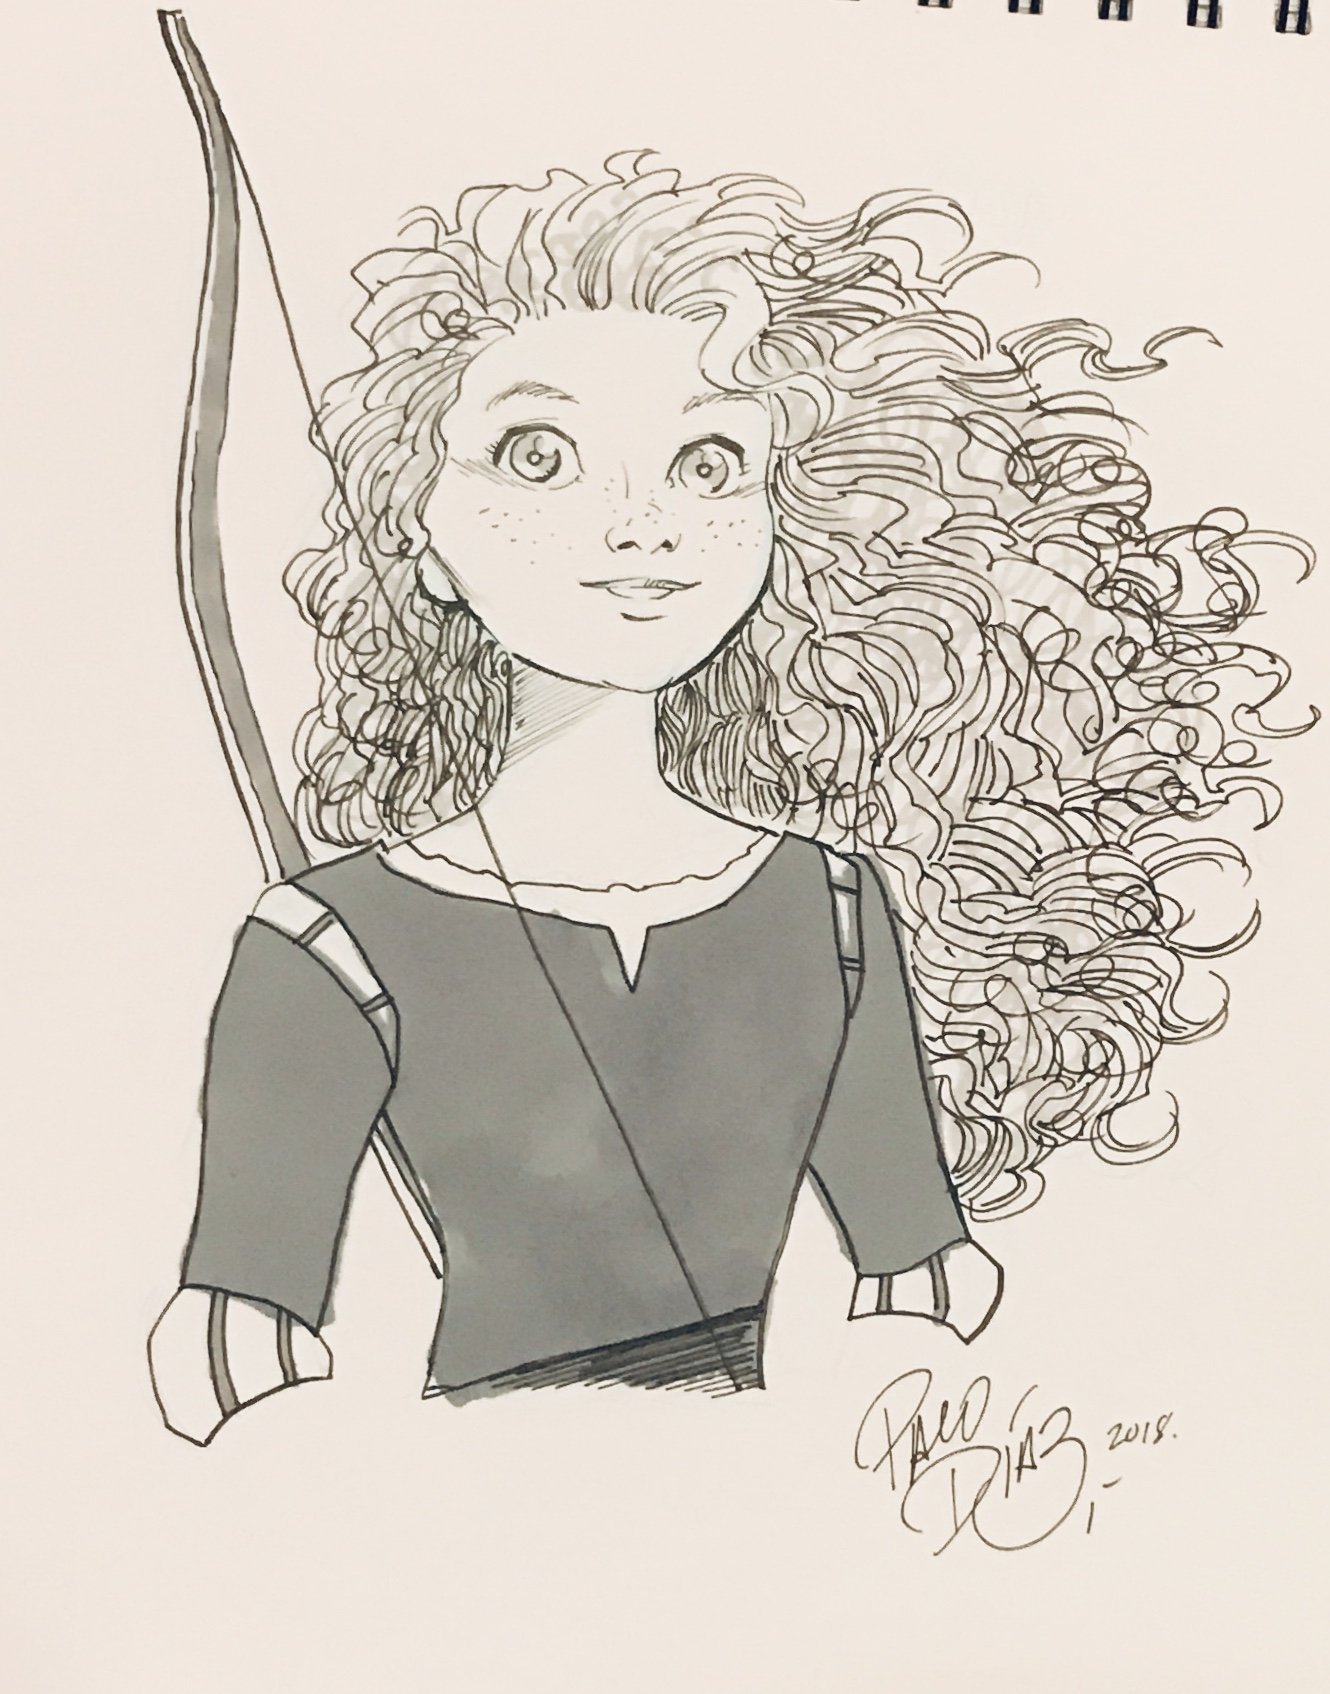 Princess Merida from Brave by Paco Diaz, in Mike (aka Off White) White